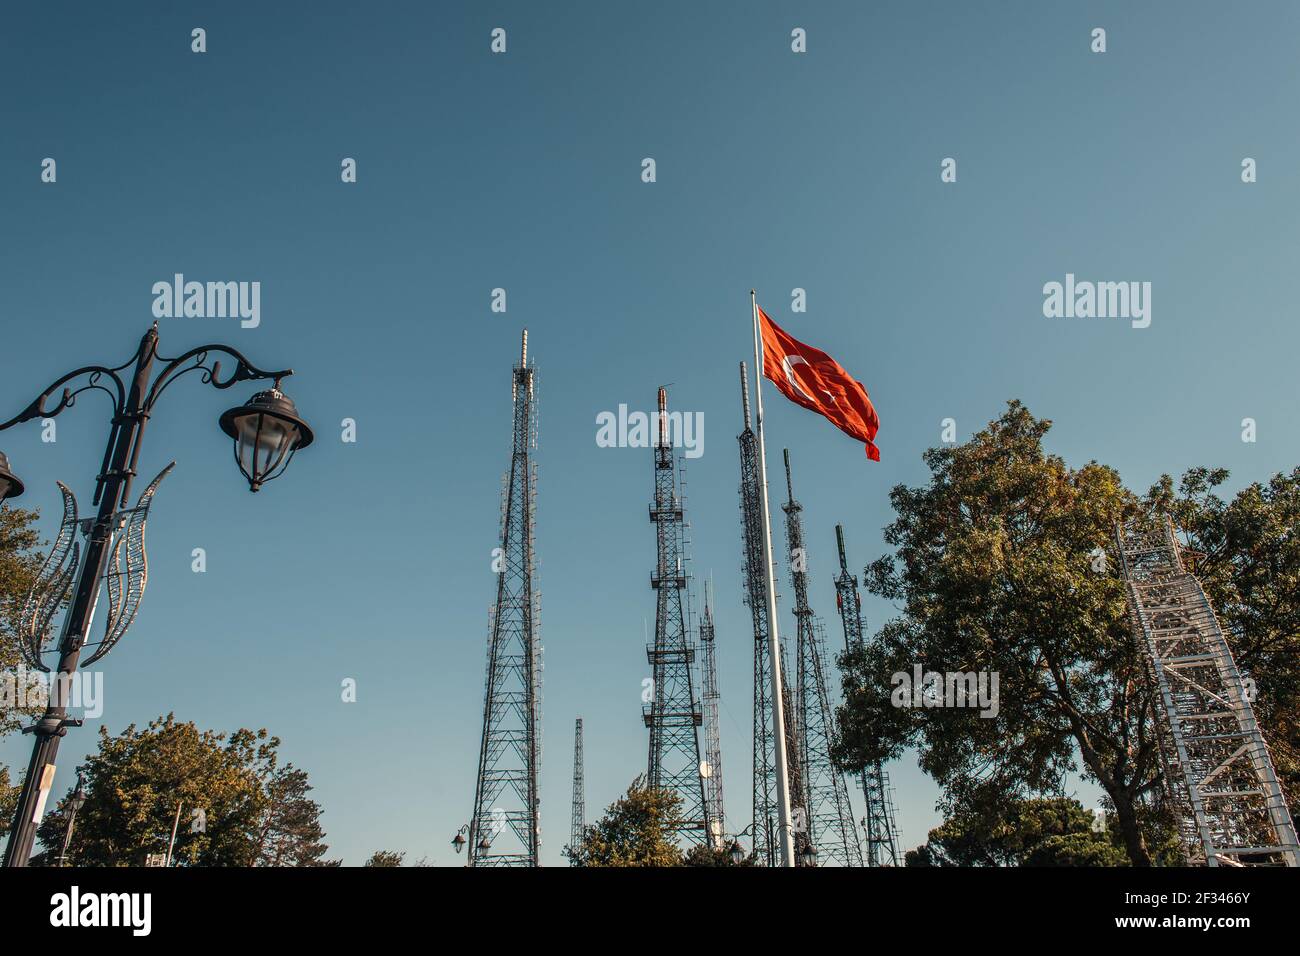 turkish flag and forged lantern near tv towers Stock Photo